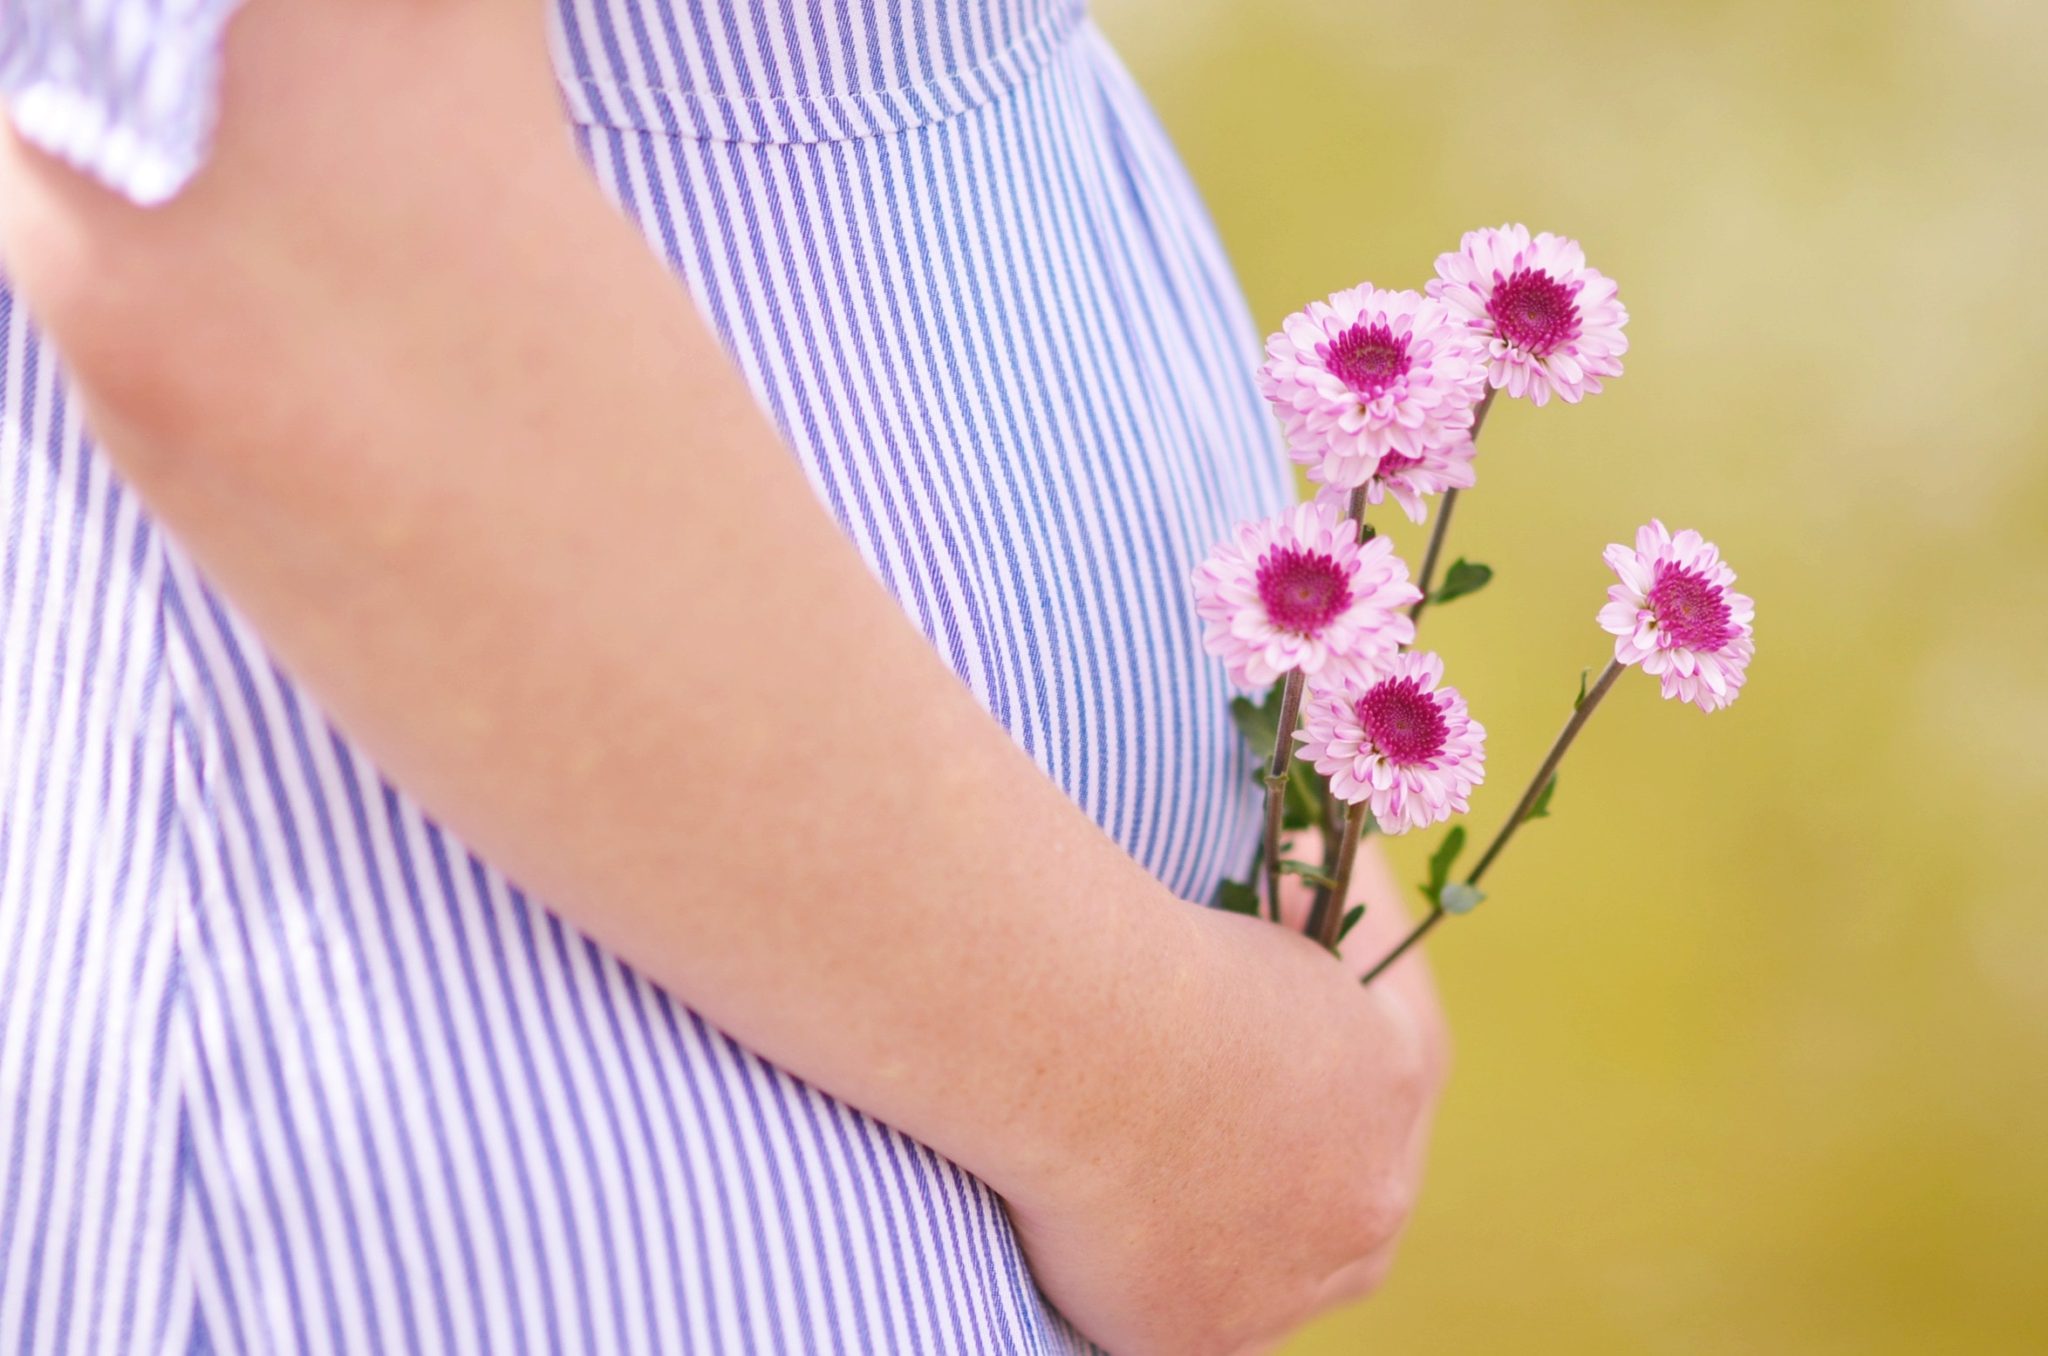 pregnancy and childbirth can be a pleasant experience